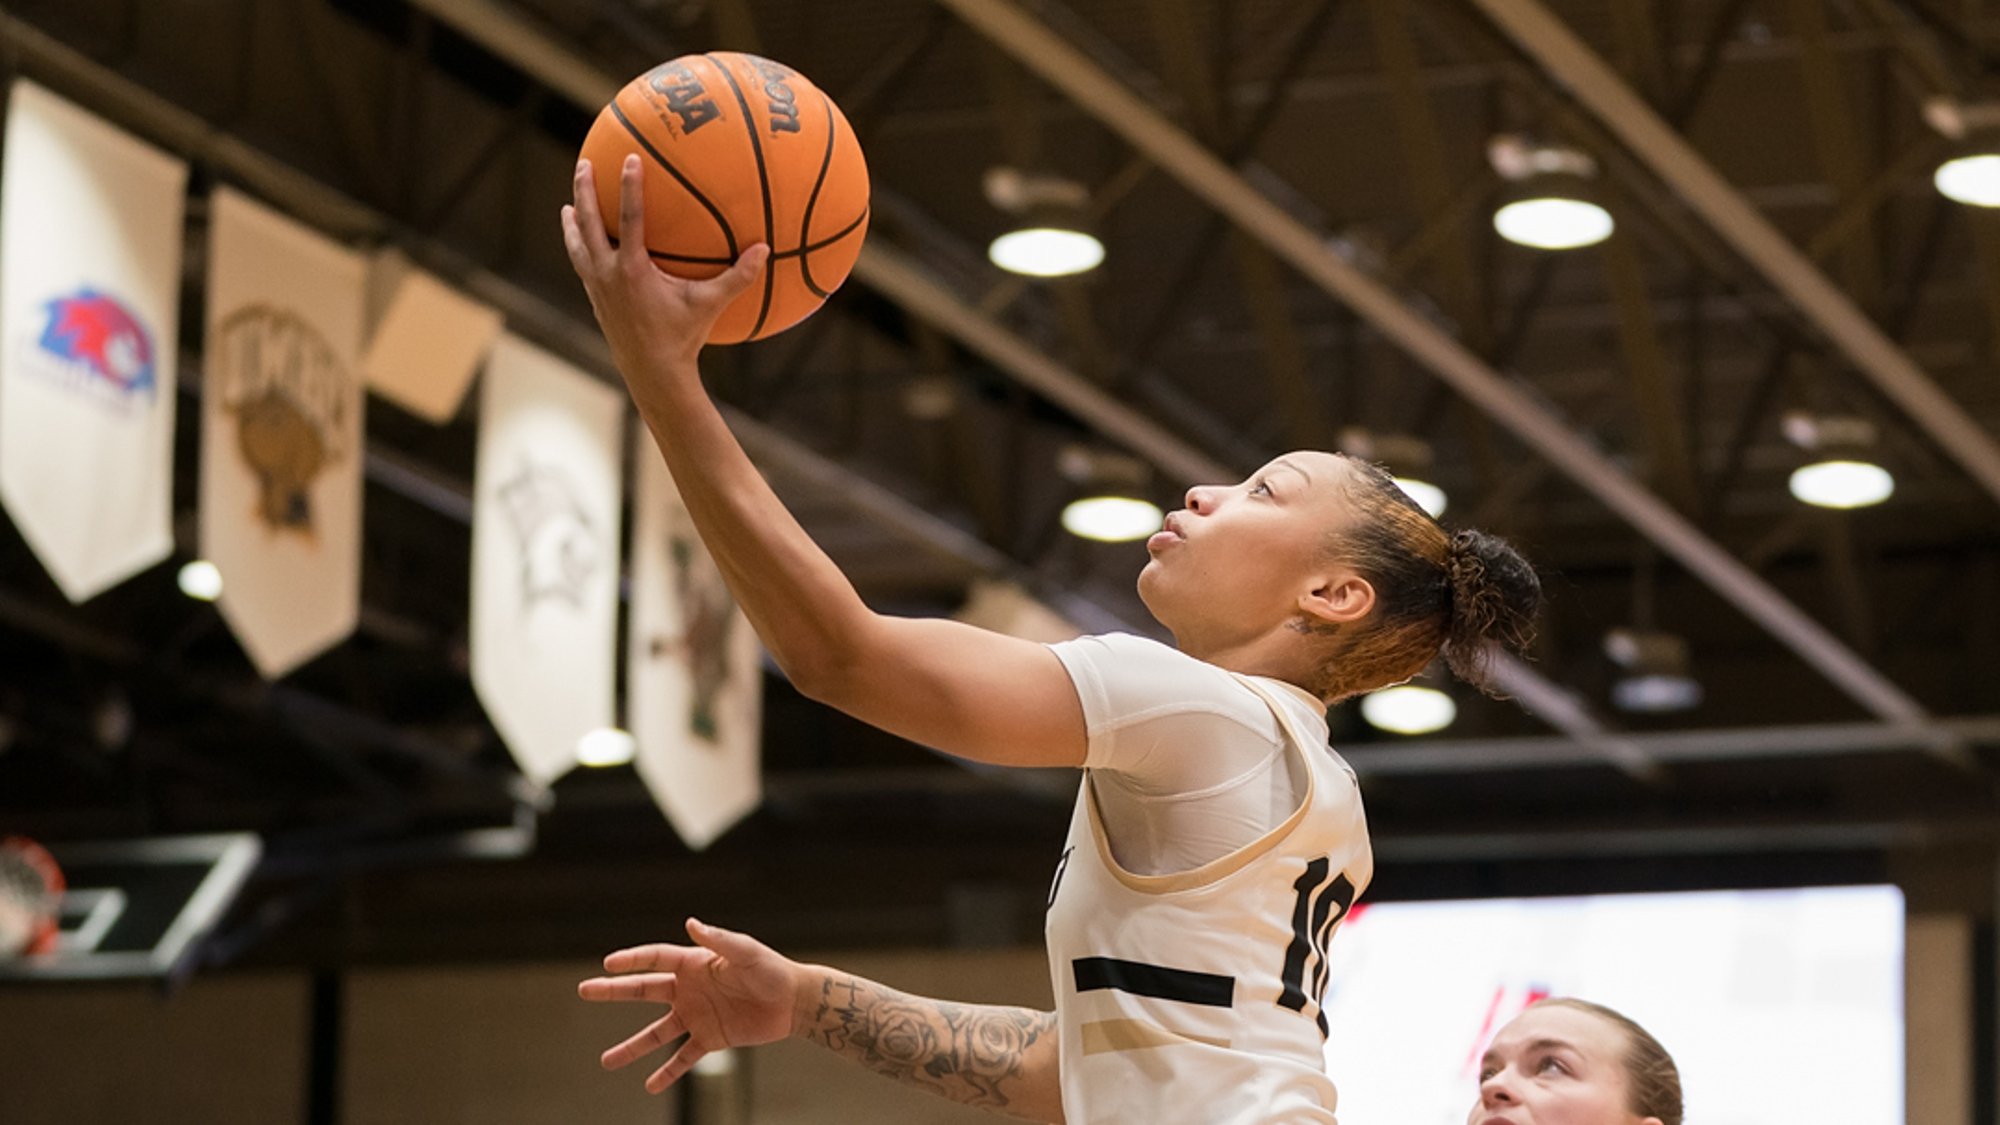 Boba, Reynolds, and Nia Scott post career-highs in win against Bridgewater State